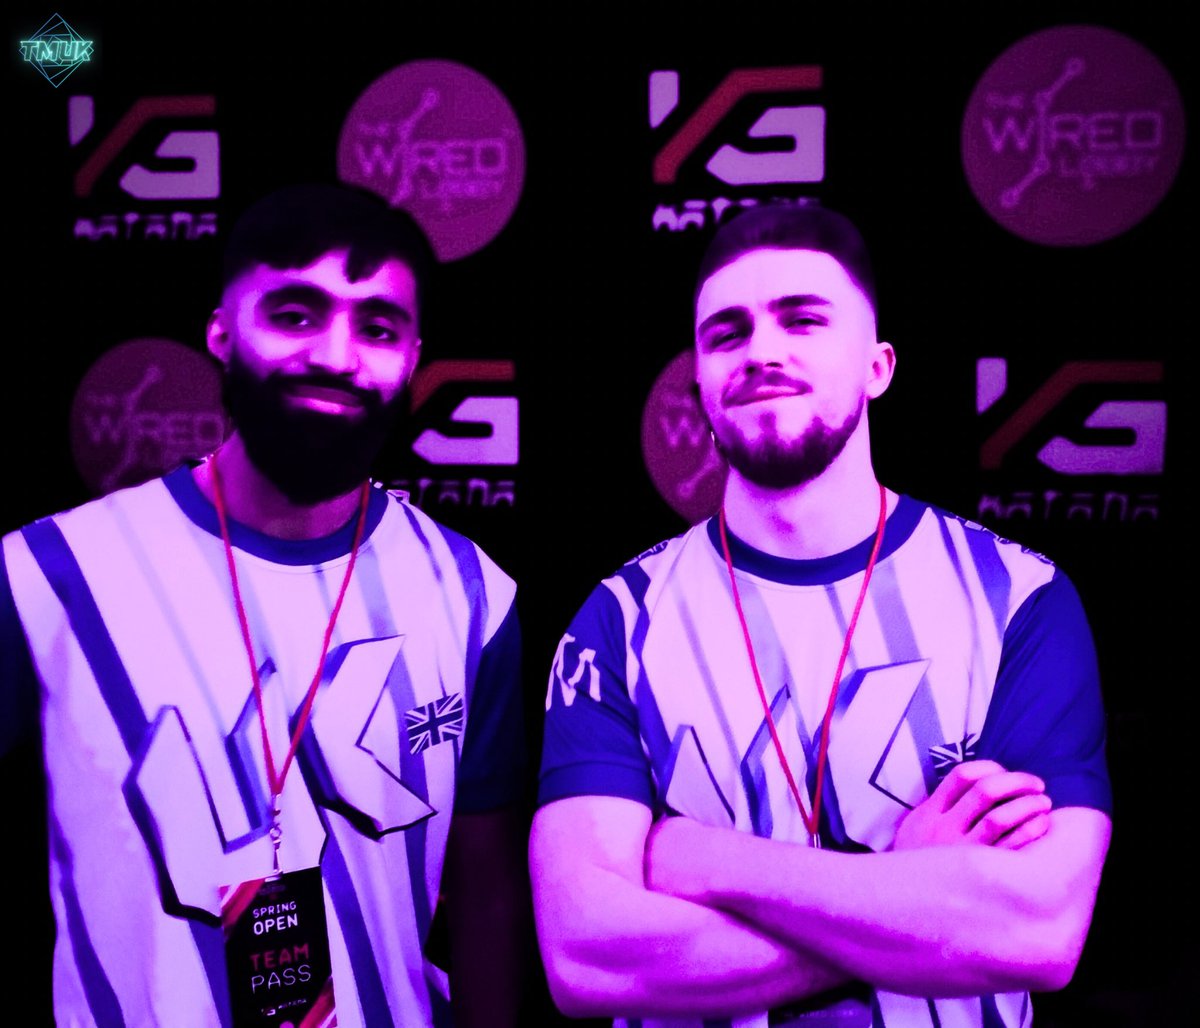 This duo when playing with confidence is liquid. The roster has been in a complete blender for months but their dedication and commitment is undeniable. With Ben and seanyy joining the team I have do doubt the squad will finish the year strong and have a great laugh doing so.